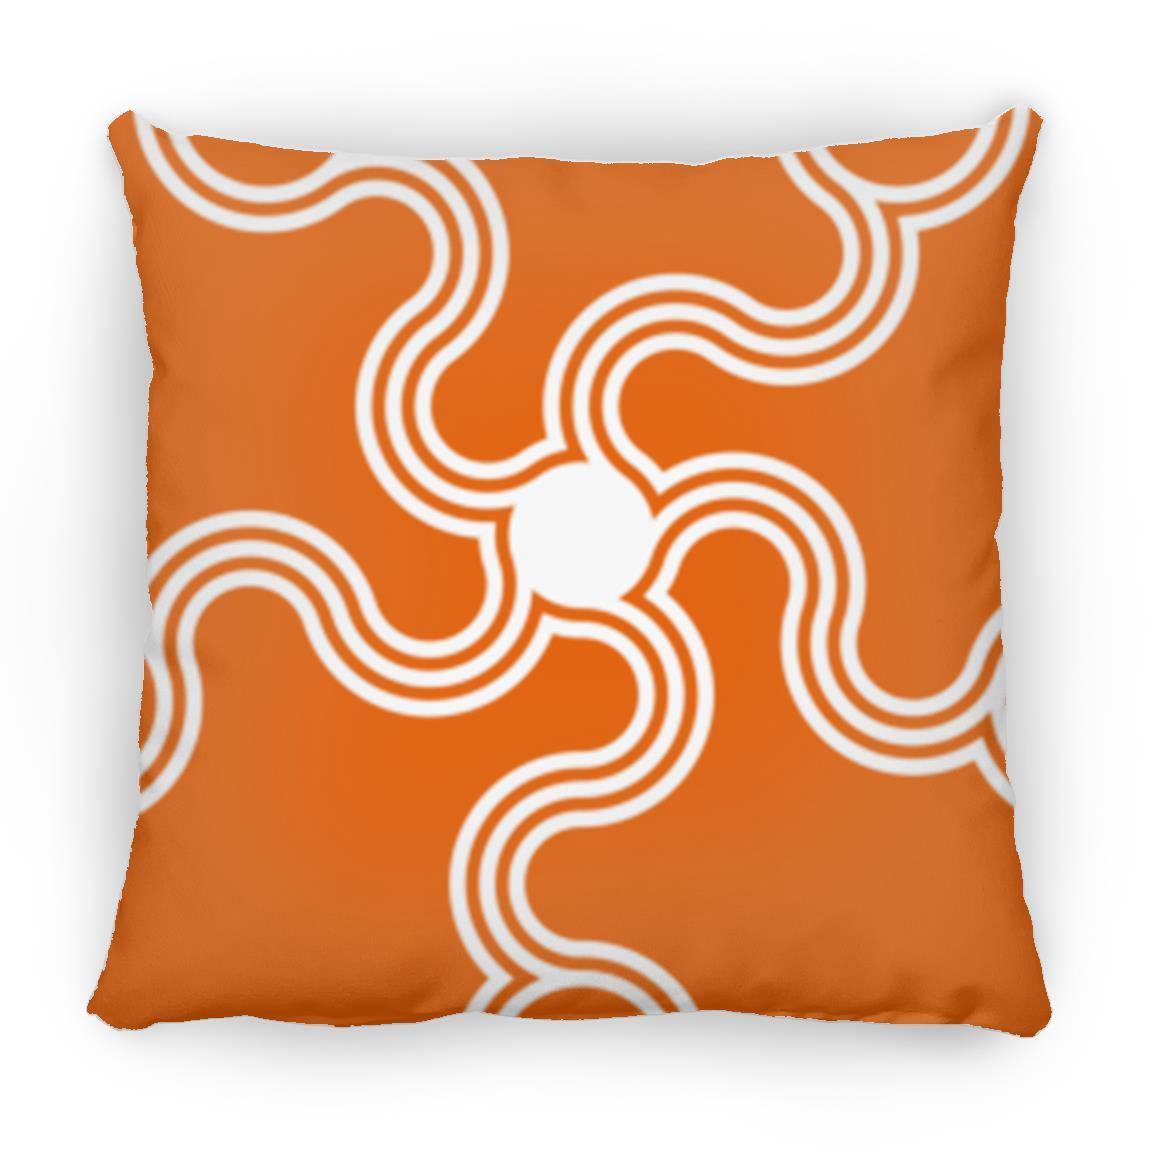 Crop Circle Pillow - Willoughby - Shapes of Wisdom